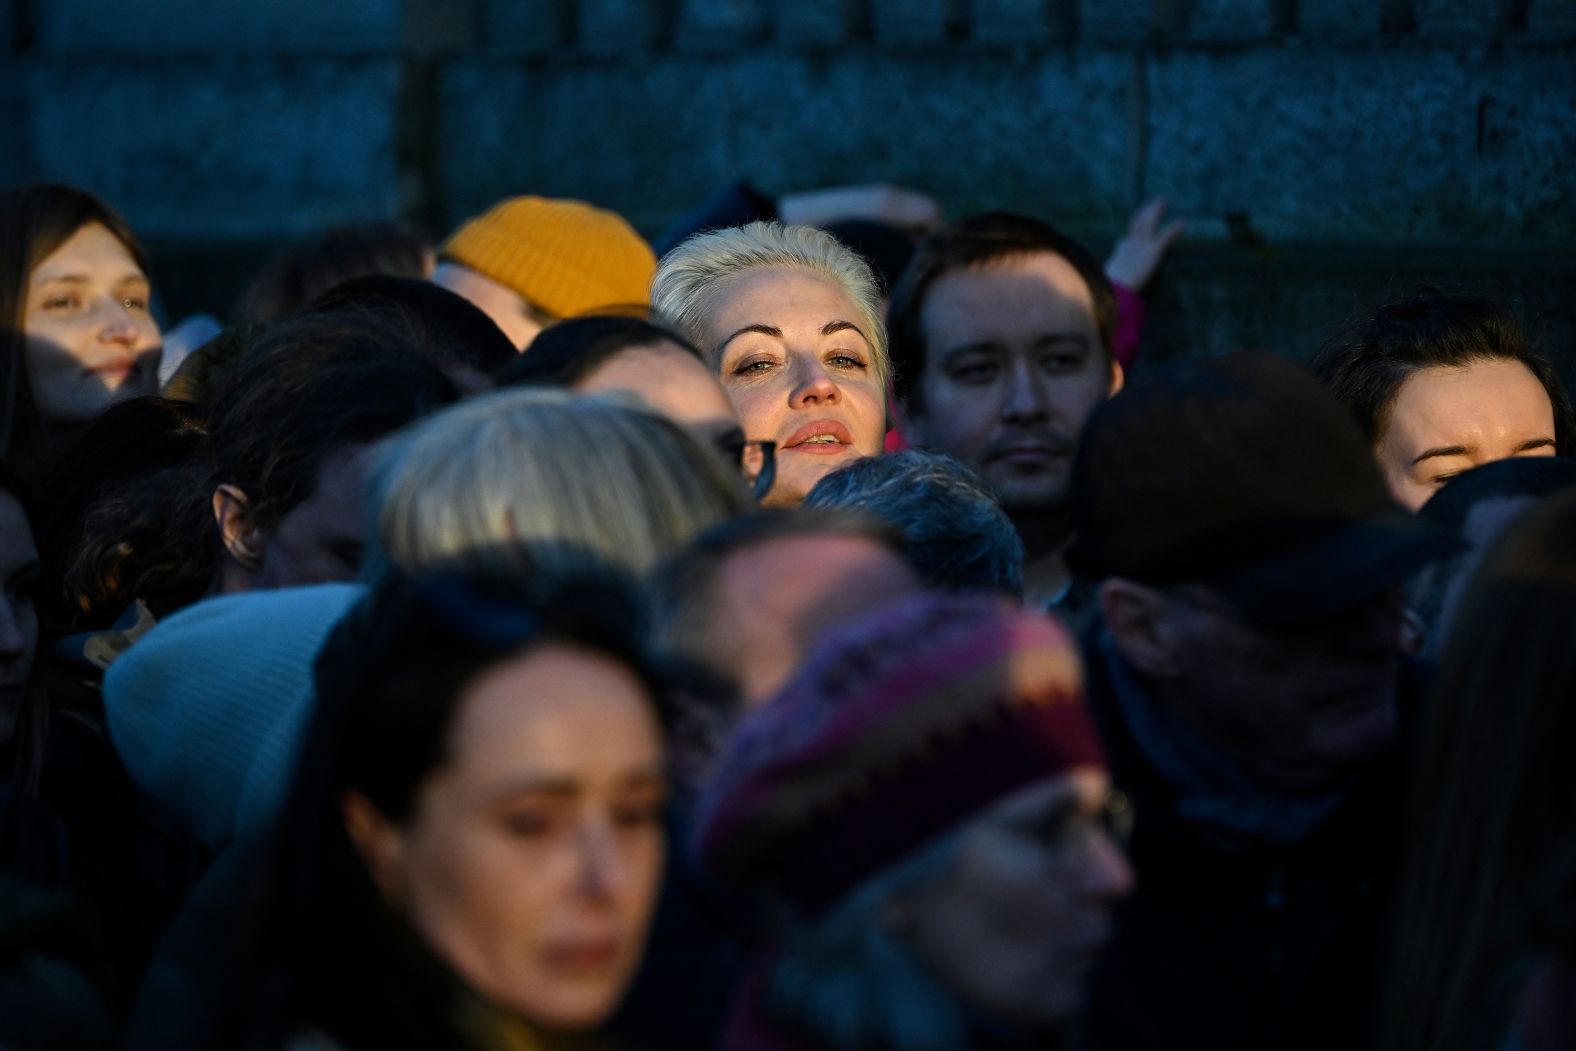 Yulia Navalnya, widow of the late opposition figure Alexey Navalny, lines up to vote in Russia's presidential election at the Russian embassy in Berlin on Sunday, March 17. Navalnaya had urged Russians to turn out collectively as a <a href="index.php?page=&url=https%3A%2F%2Fwww.cnn.com%2F2024%2F03%2F17%2Feurope%2Frussia-election-navalny-protests-intl%2Findex.html" target="_blank">show of opposition</a>.